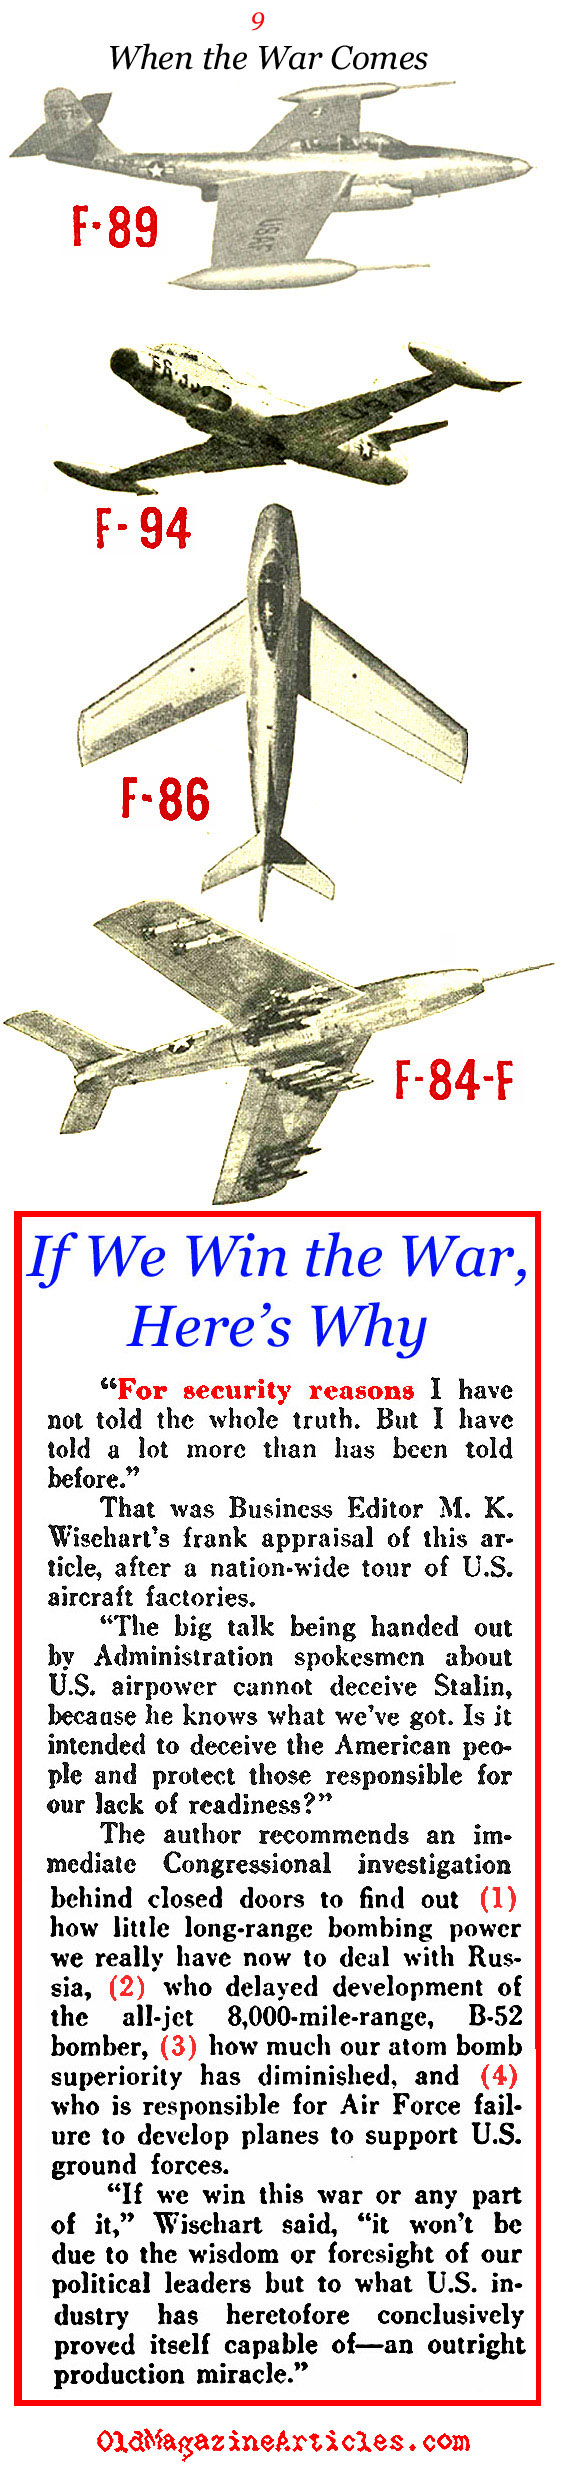 Why America Could Win A War Against Russia (Pathfinder Magazine, 1951) 